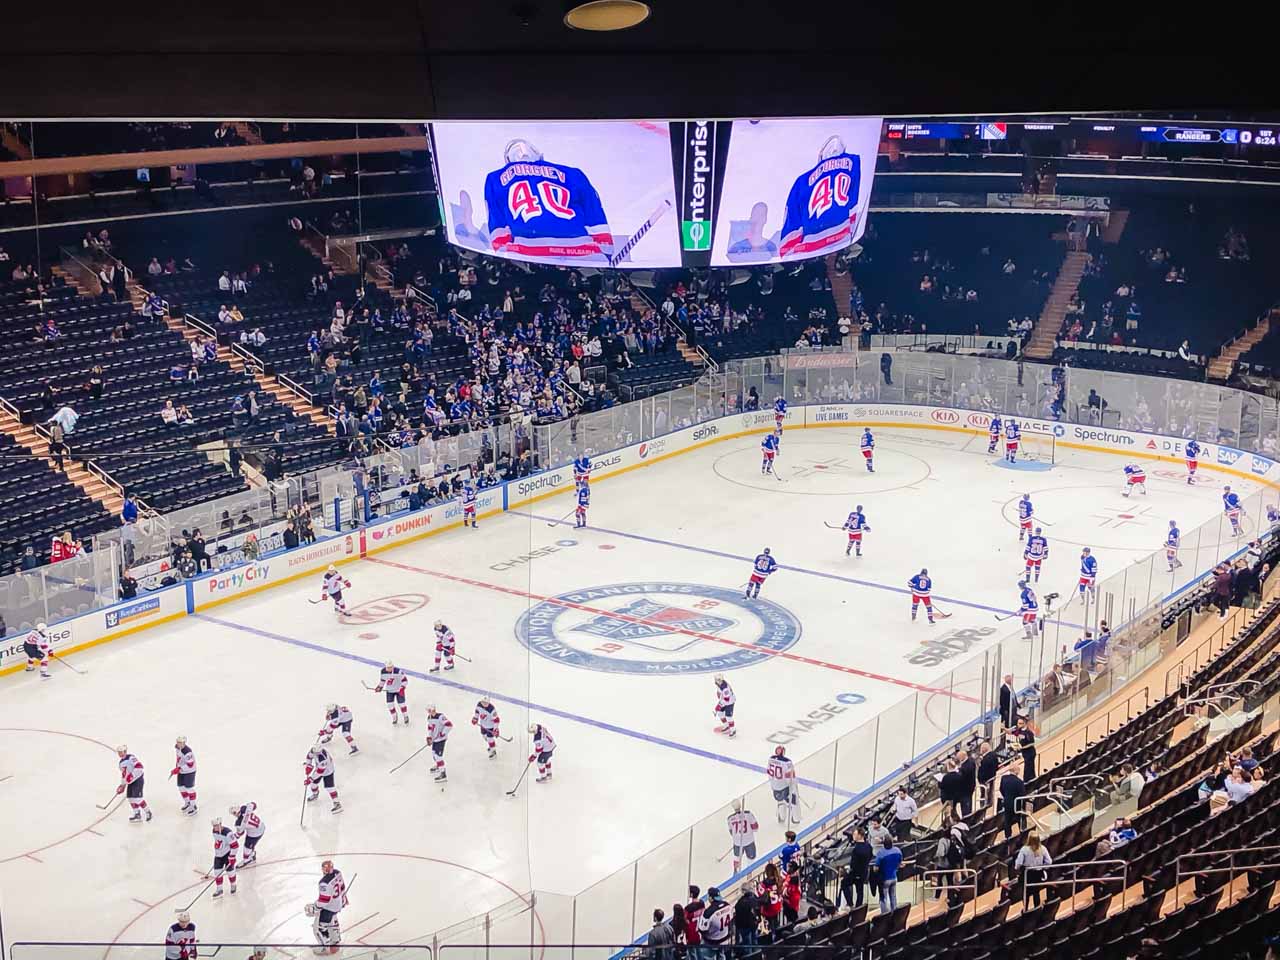 Hockey players at the New York Rangers vs New Jersey Devils game at Madison Square Garden